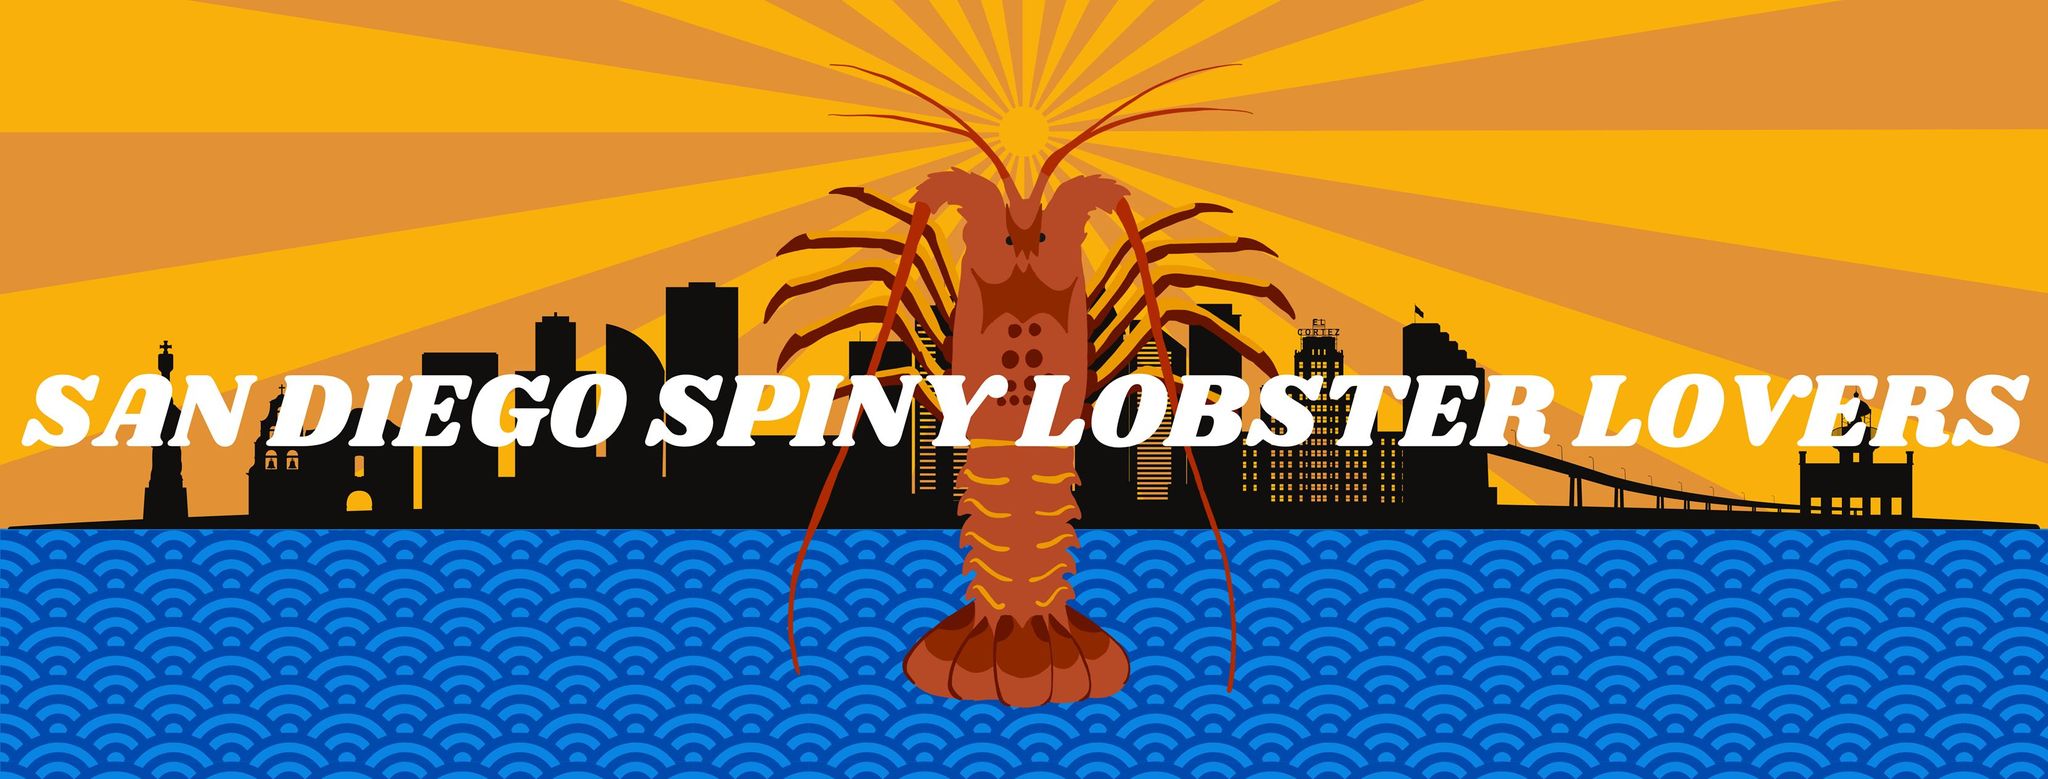  graphic with orange sun rays, swirling blue ocean and a California spiny lobster floating over a silhouette of the San Diego skyline)